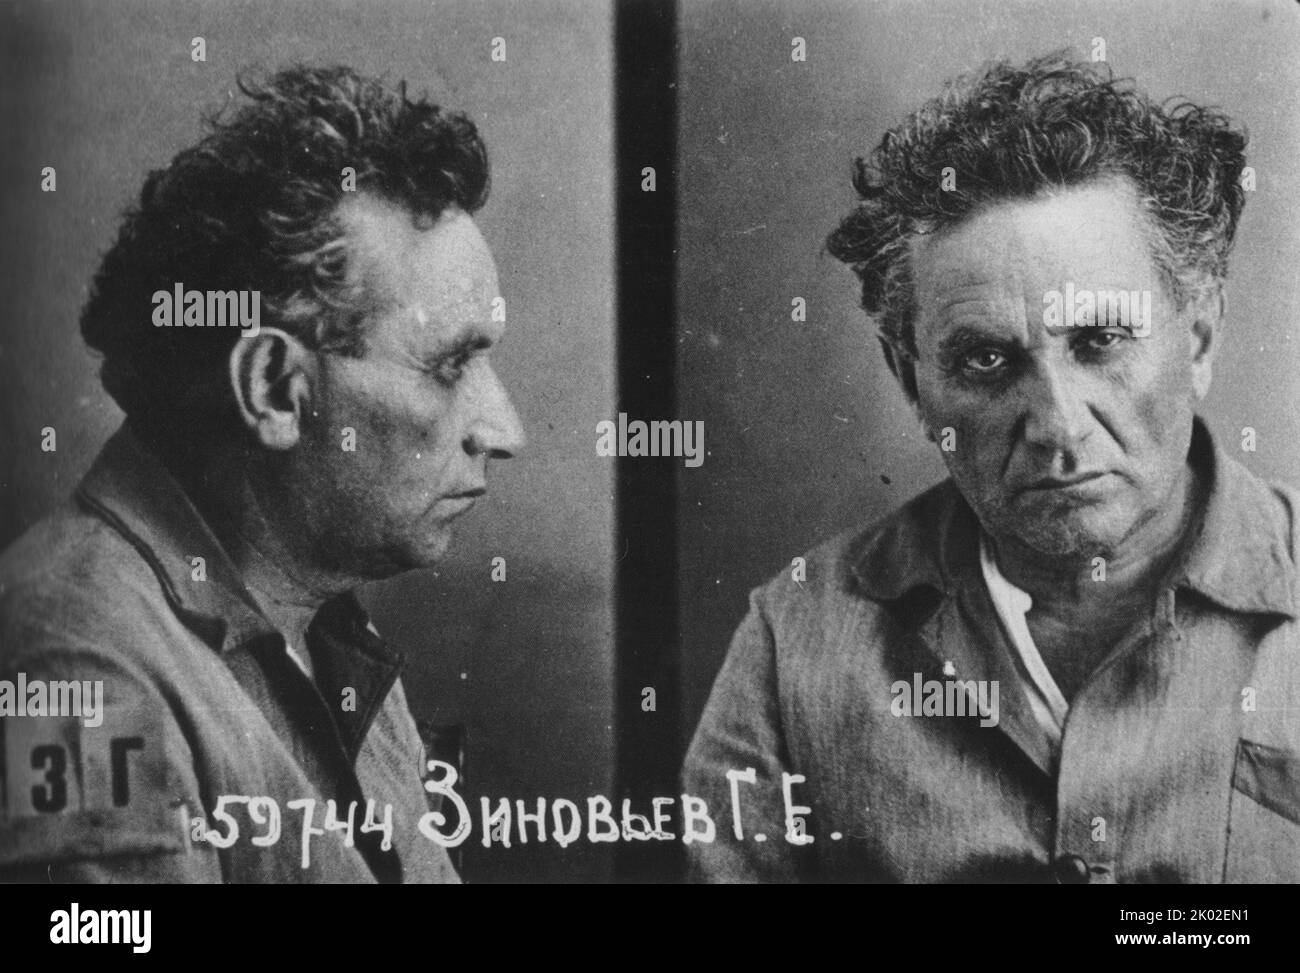 Police photographs of Zinoviev, taken by the NKVD after his arrest in 1934. Stock Photo